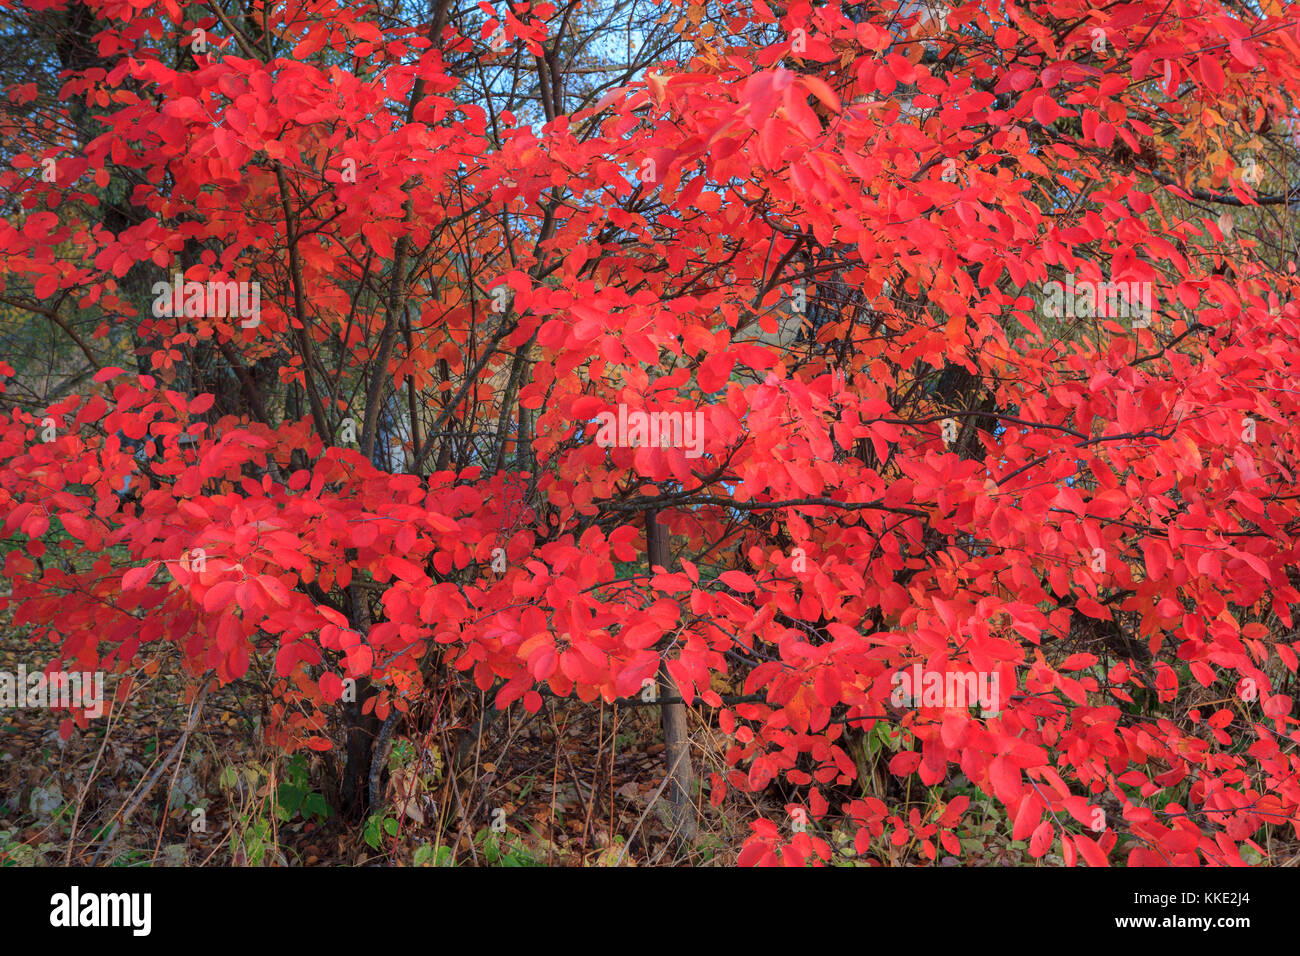 Vivid red leaves Stock Photo